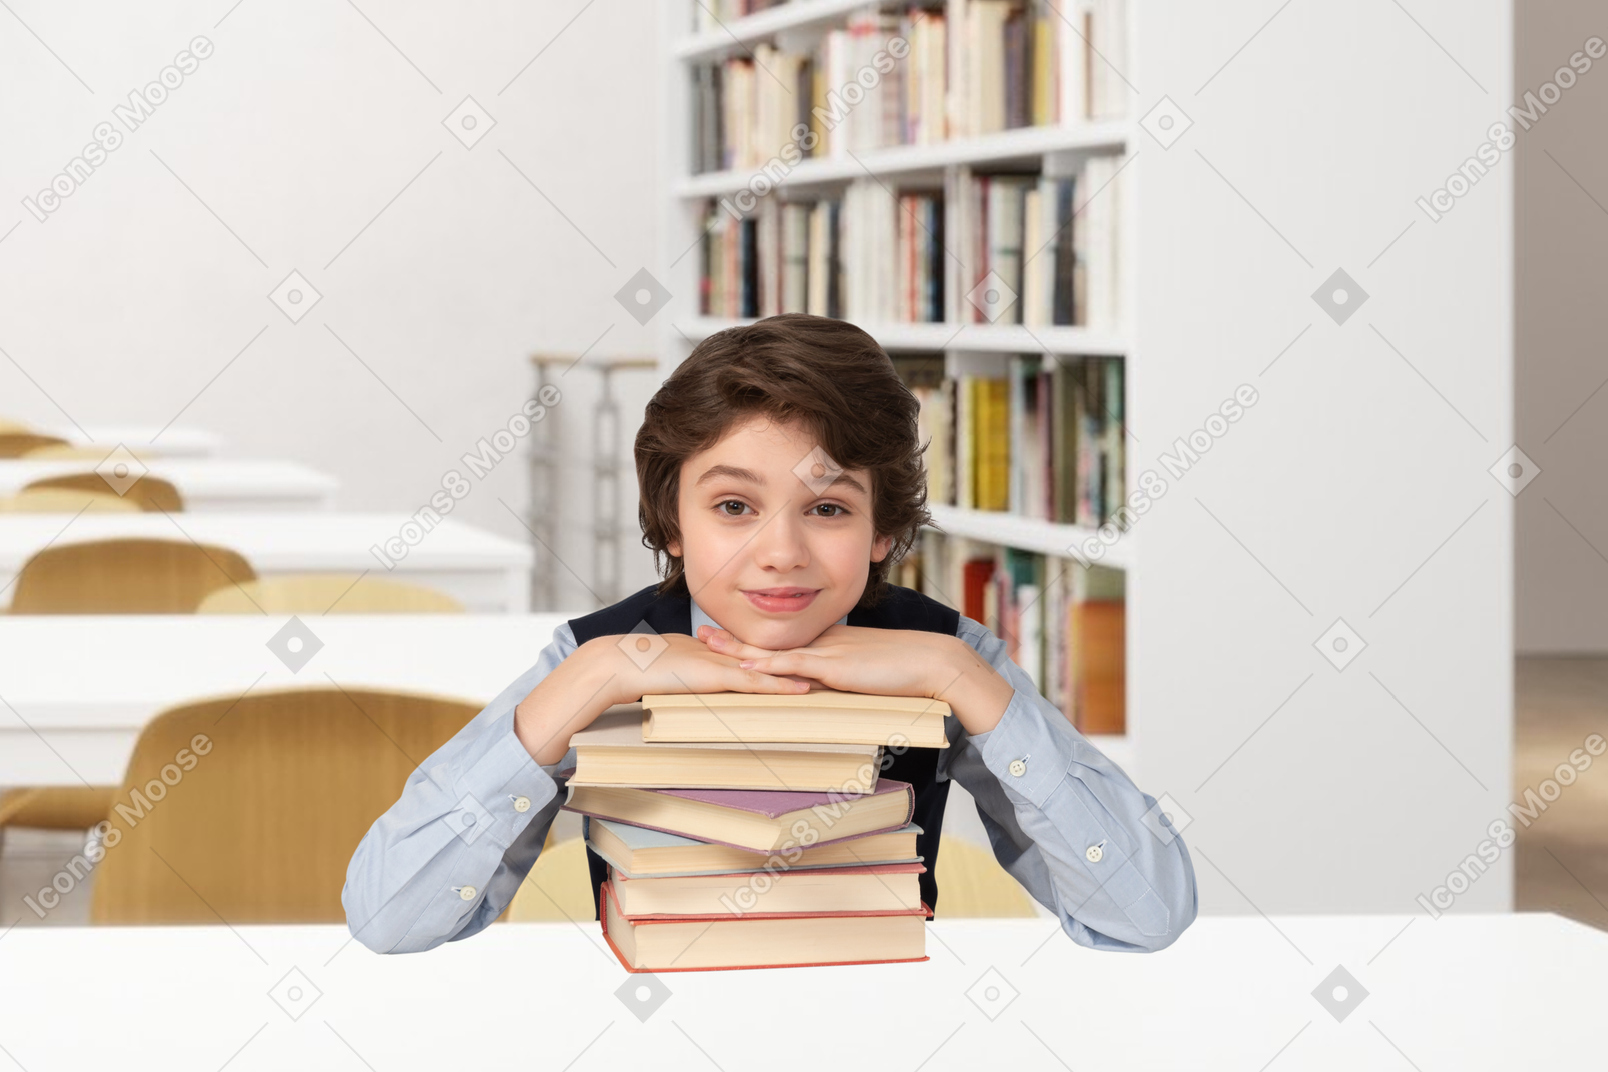 A young boy sitting behind a stack of books